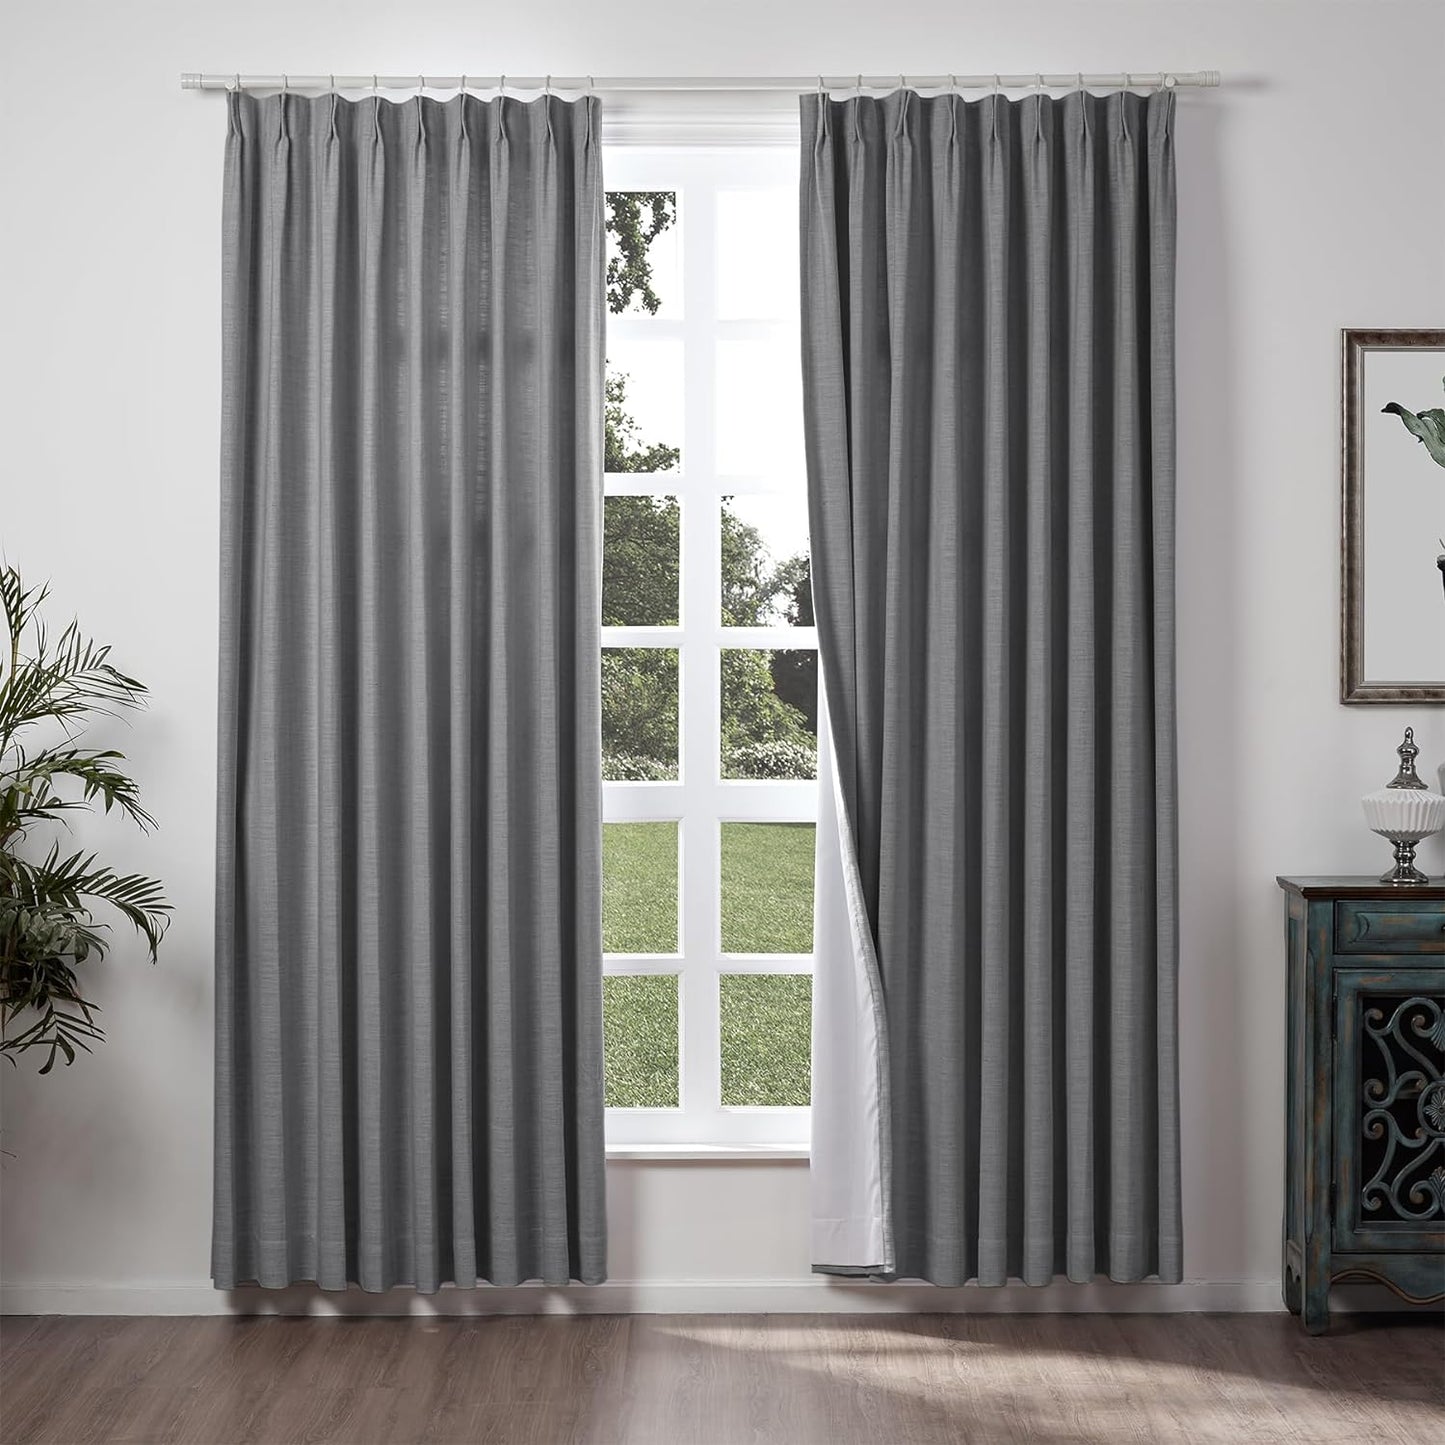 Chadmade 50" W X 84" L Polyester Linen Drape with Blackout Lining Pinch Pleat Curtain for Sliding Door Patio Door Living Room Bedroom, (1 Panel) Beige White Liz Collection  ChadMade Carbon Grey (16) 50Wx84L 